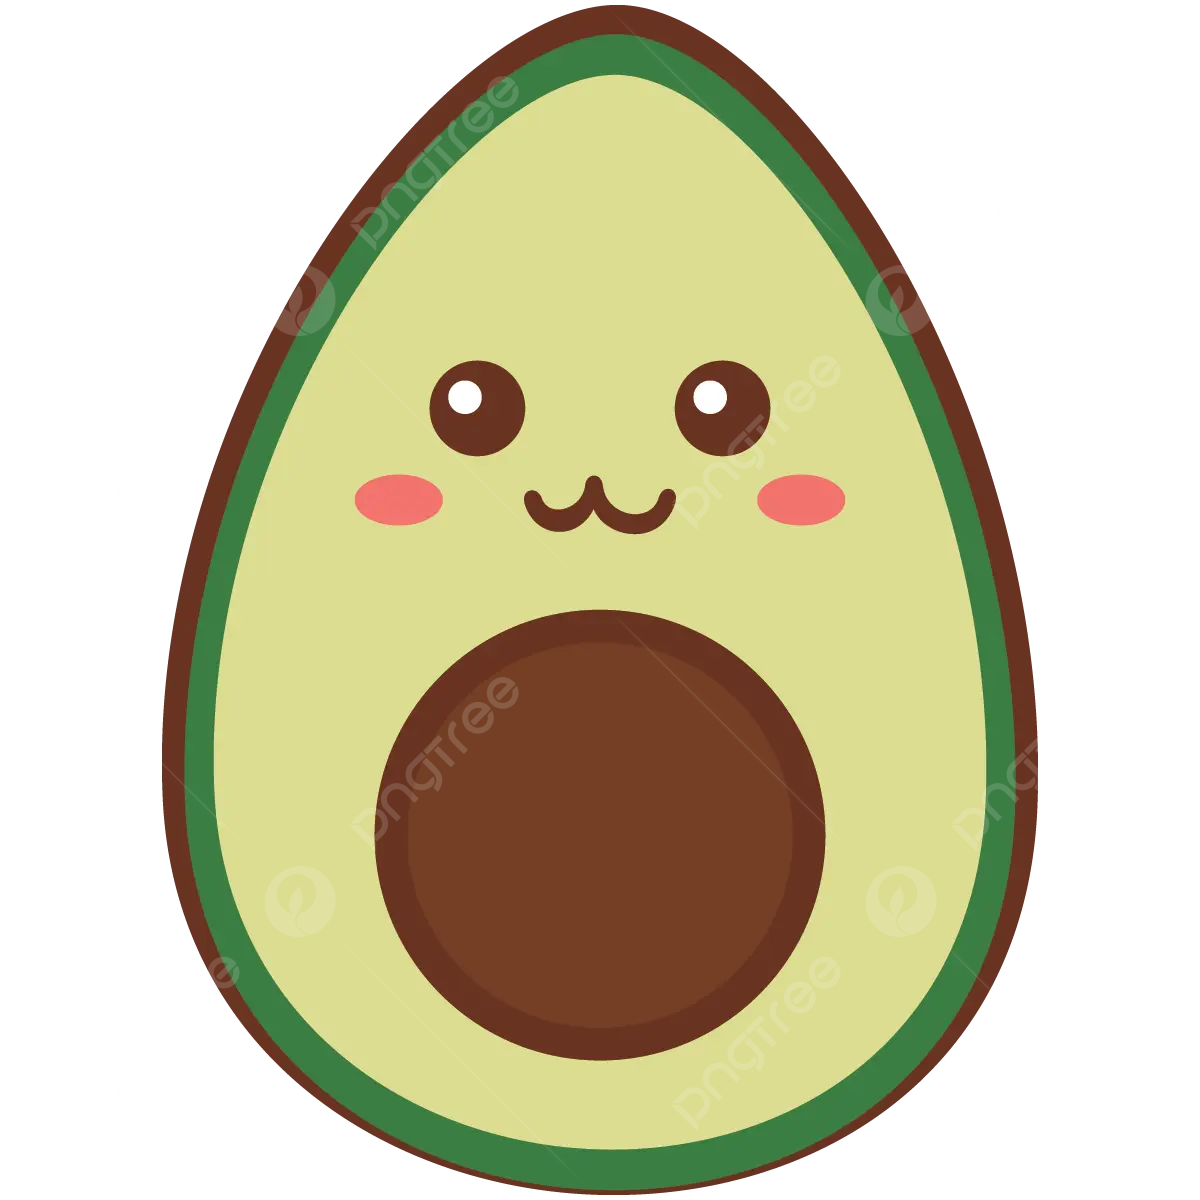 pngtree-cute-avocado-png-image_9126633.png